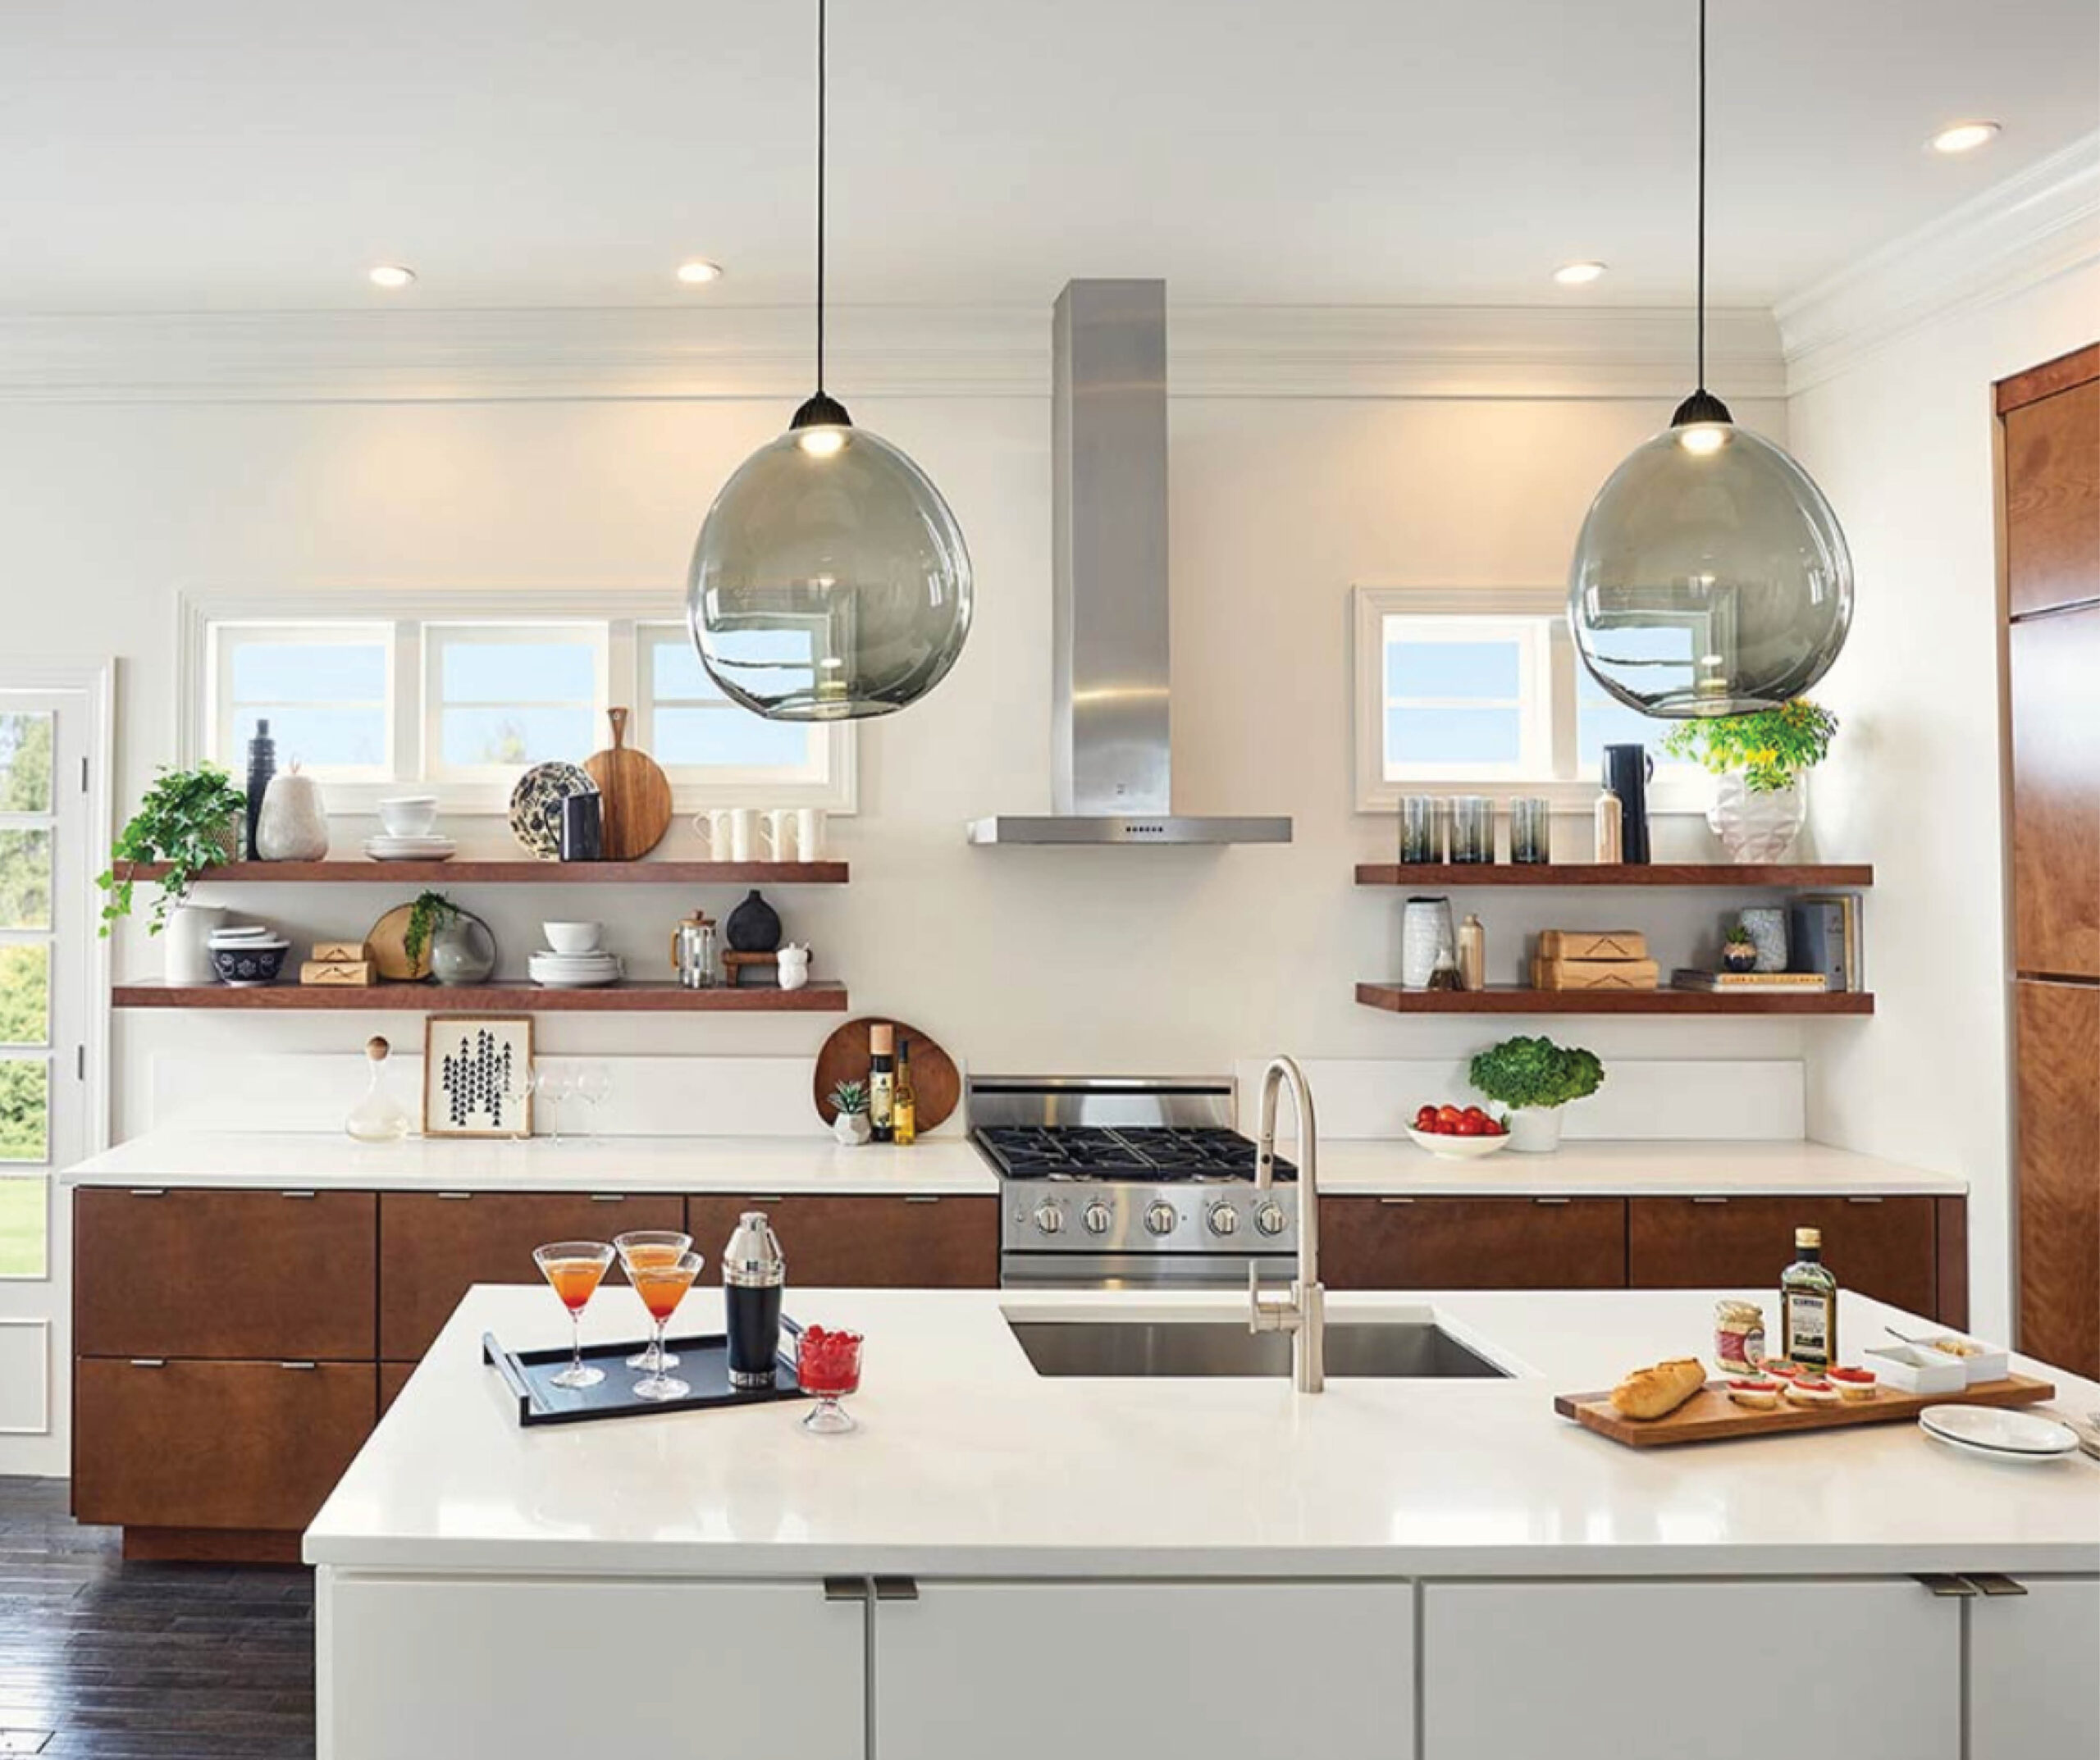 7 Factors to Consider Before Buying a Range Hood